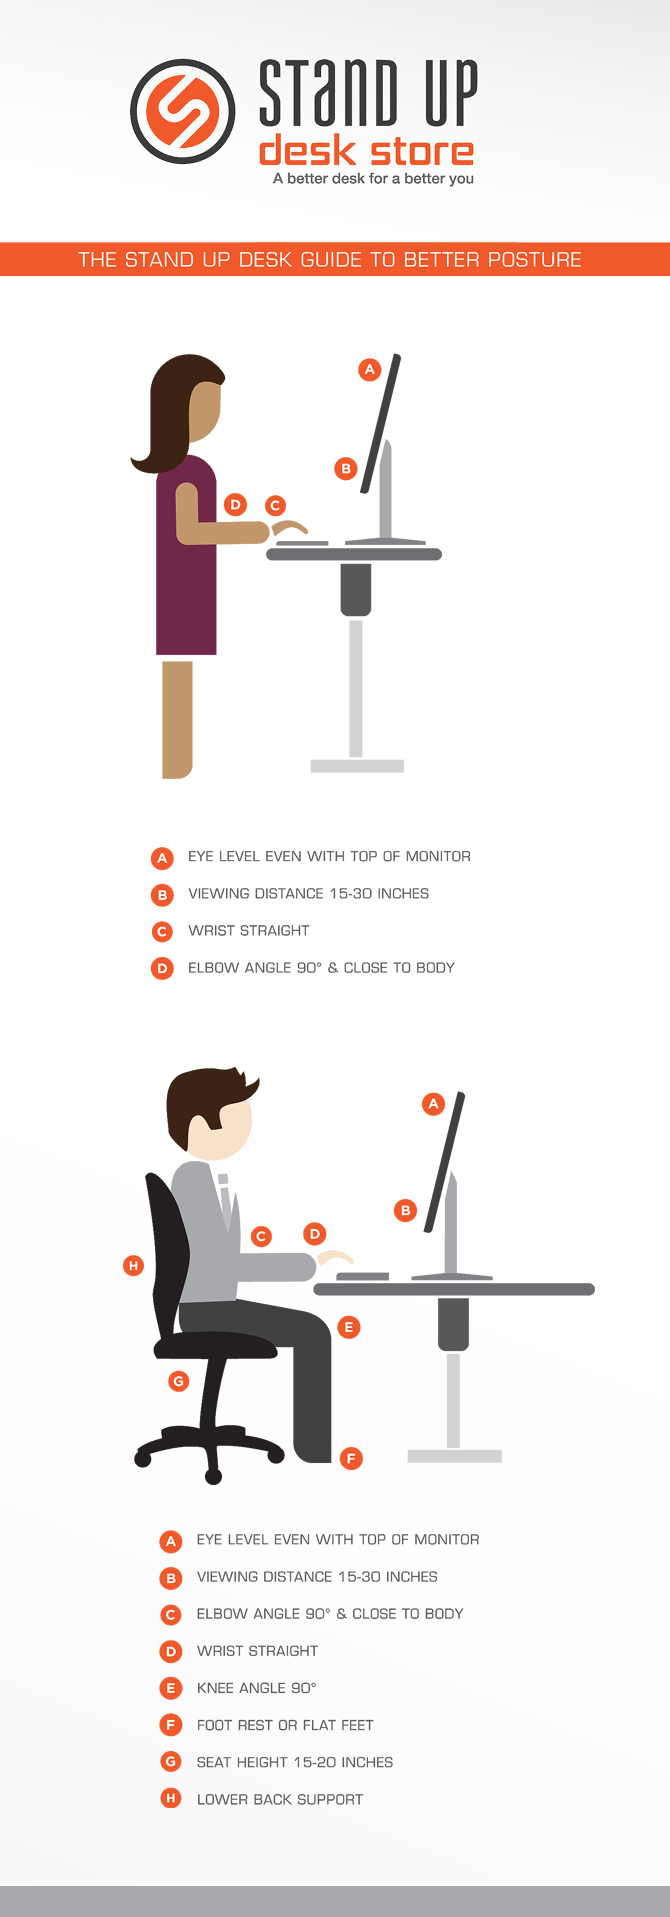 The health benefits of standing vs. sitting